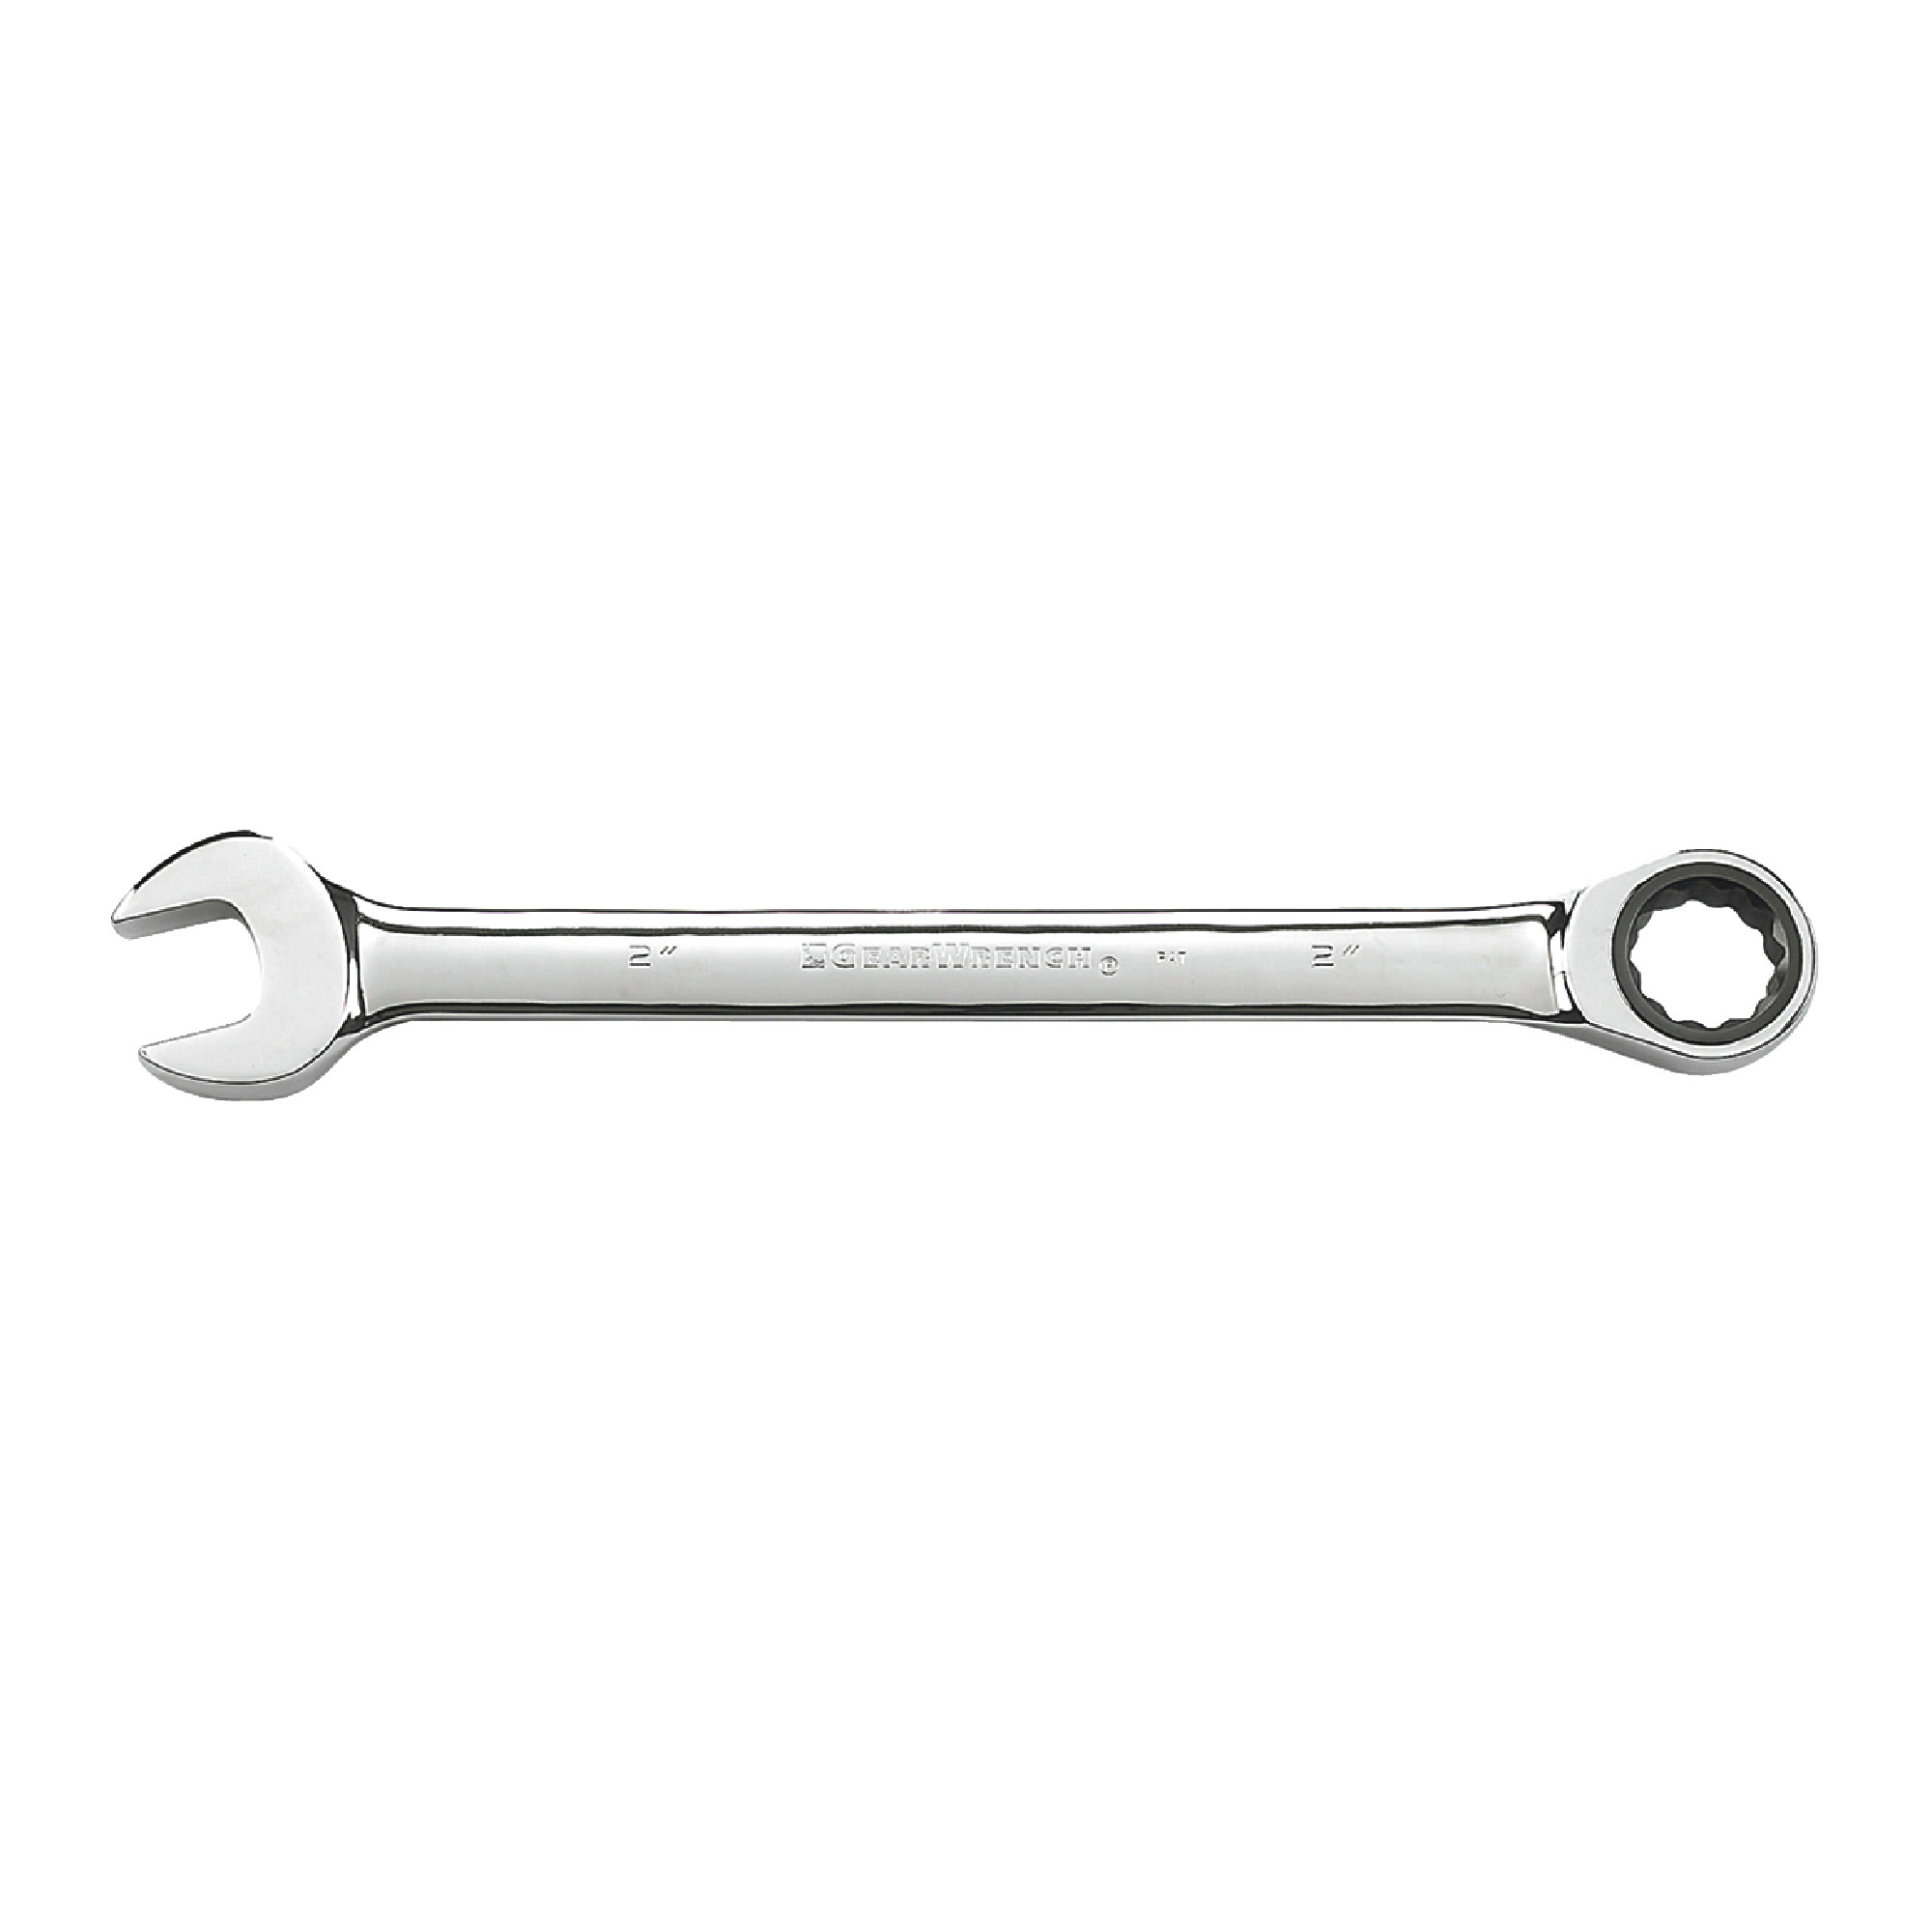 5/16" 12 Point Ratcheting Combination Wrench